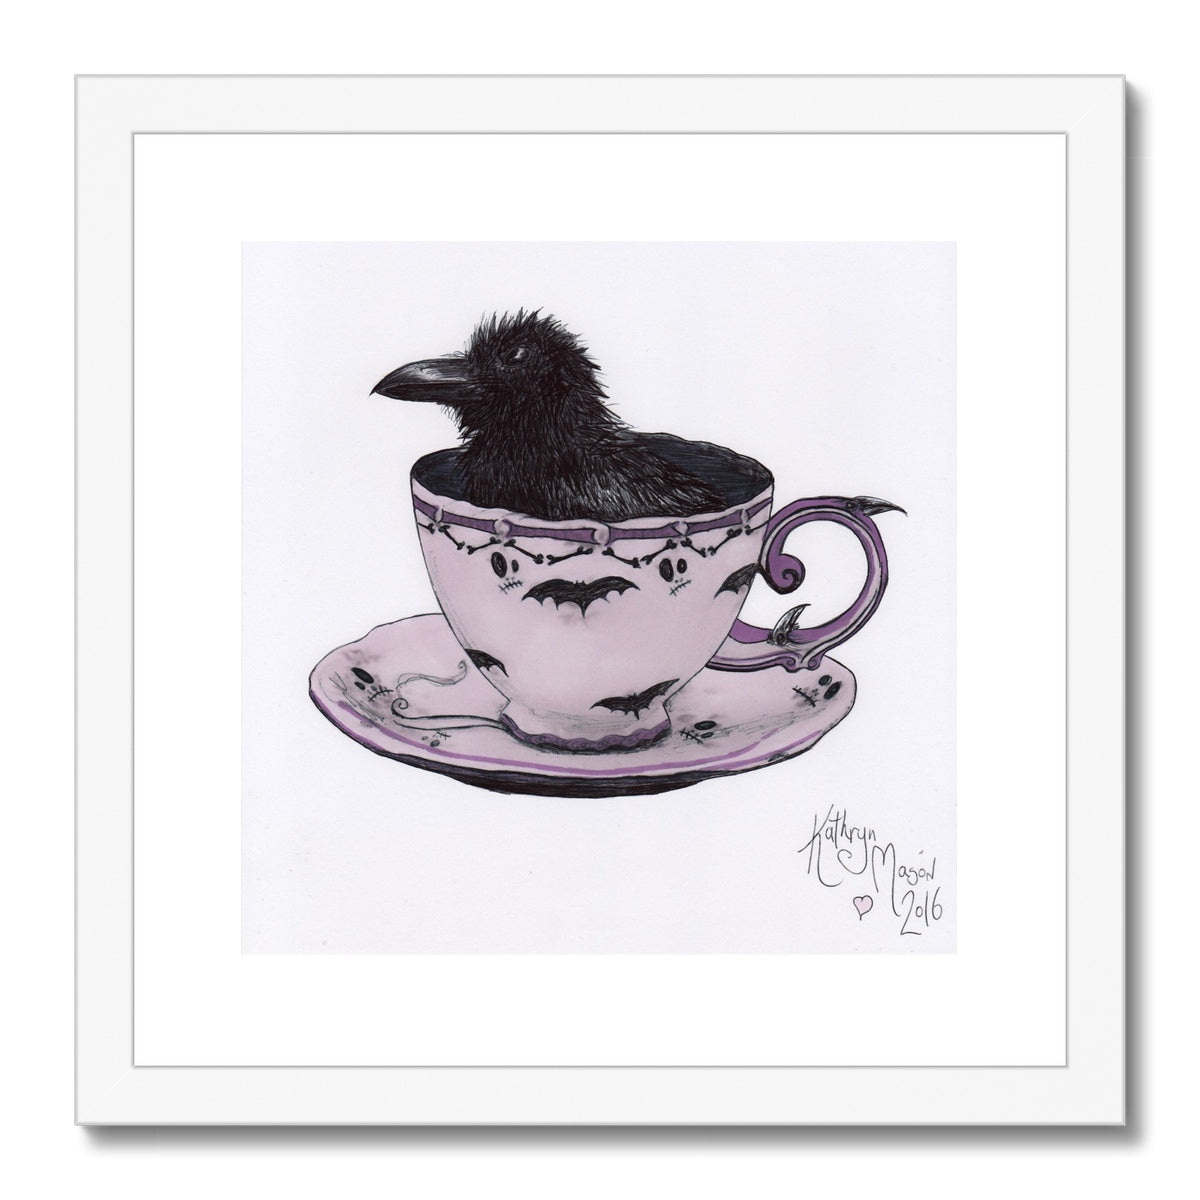 Photo showing 'Sheltering from a Storm in a Teacup' Cute Baby Crow Gothic Fine Art Print from artist Kathryn Mason's original drawing. Framed and Mounted. Shown here with white frame.